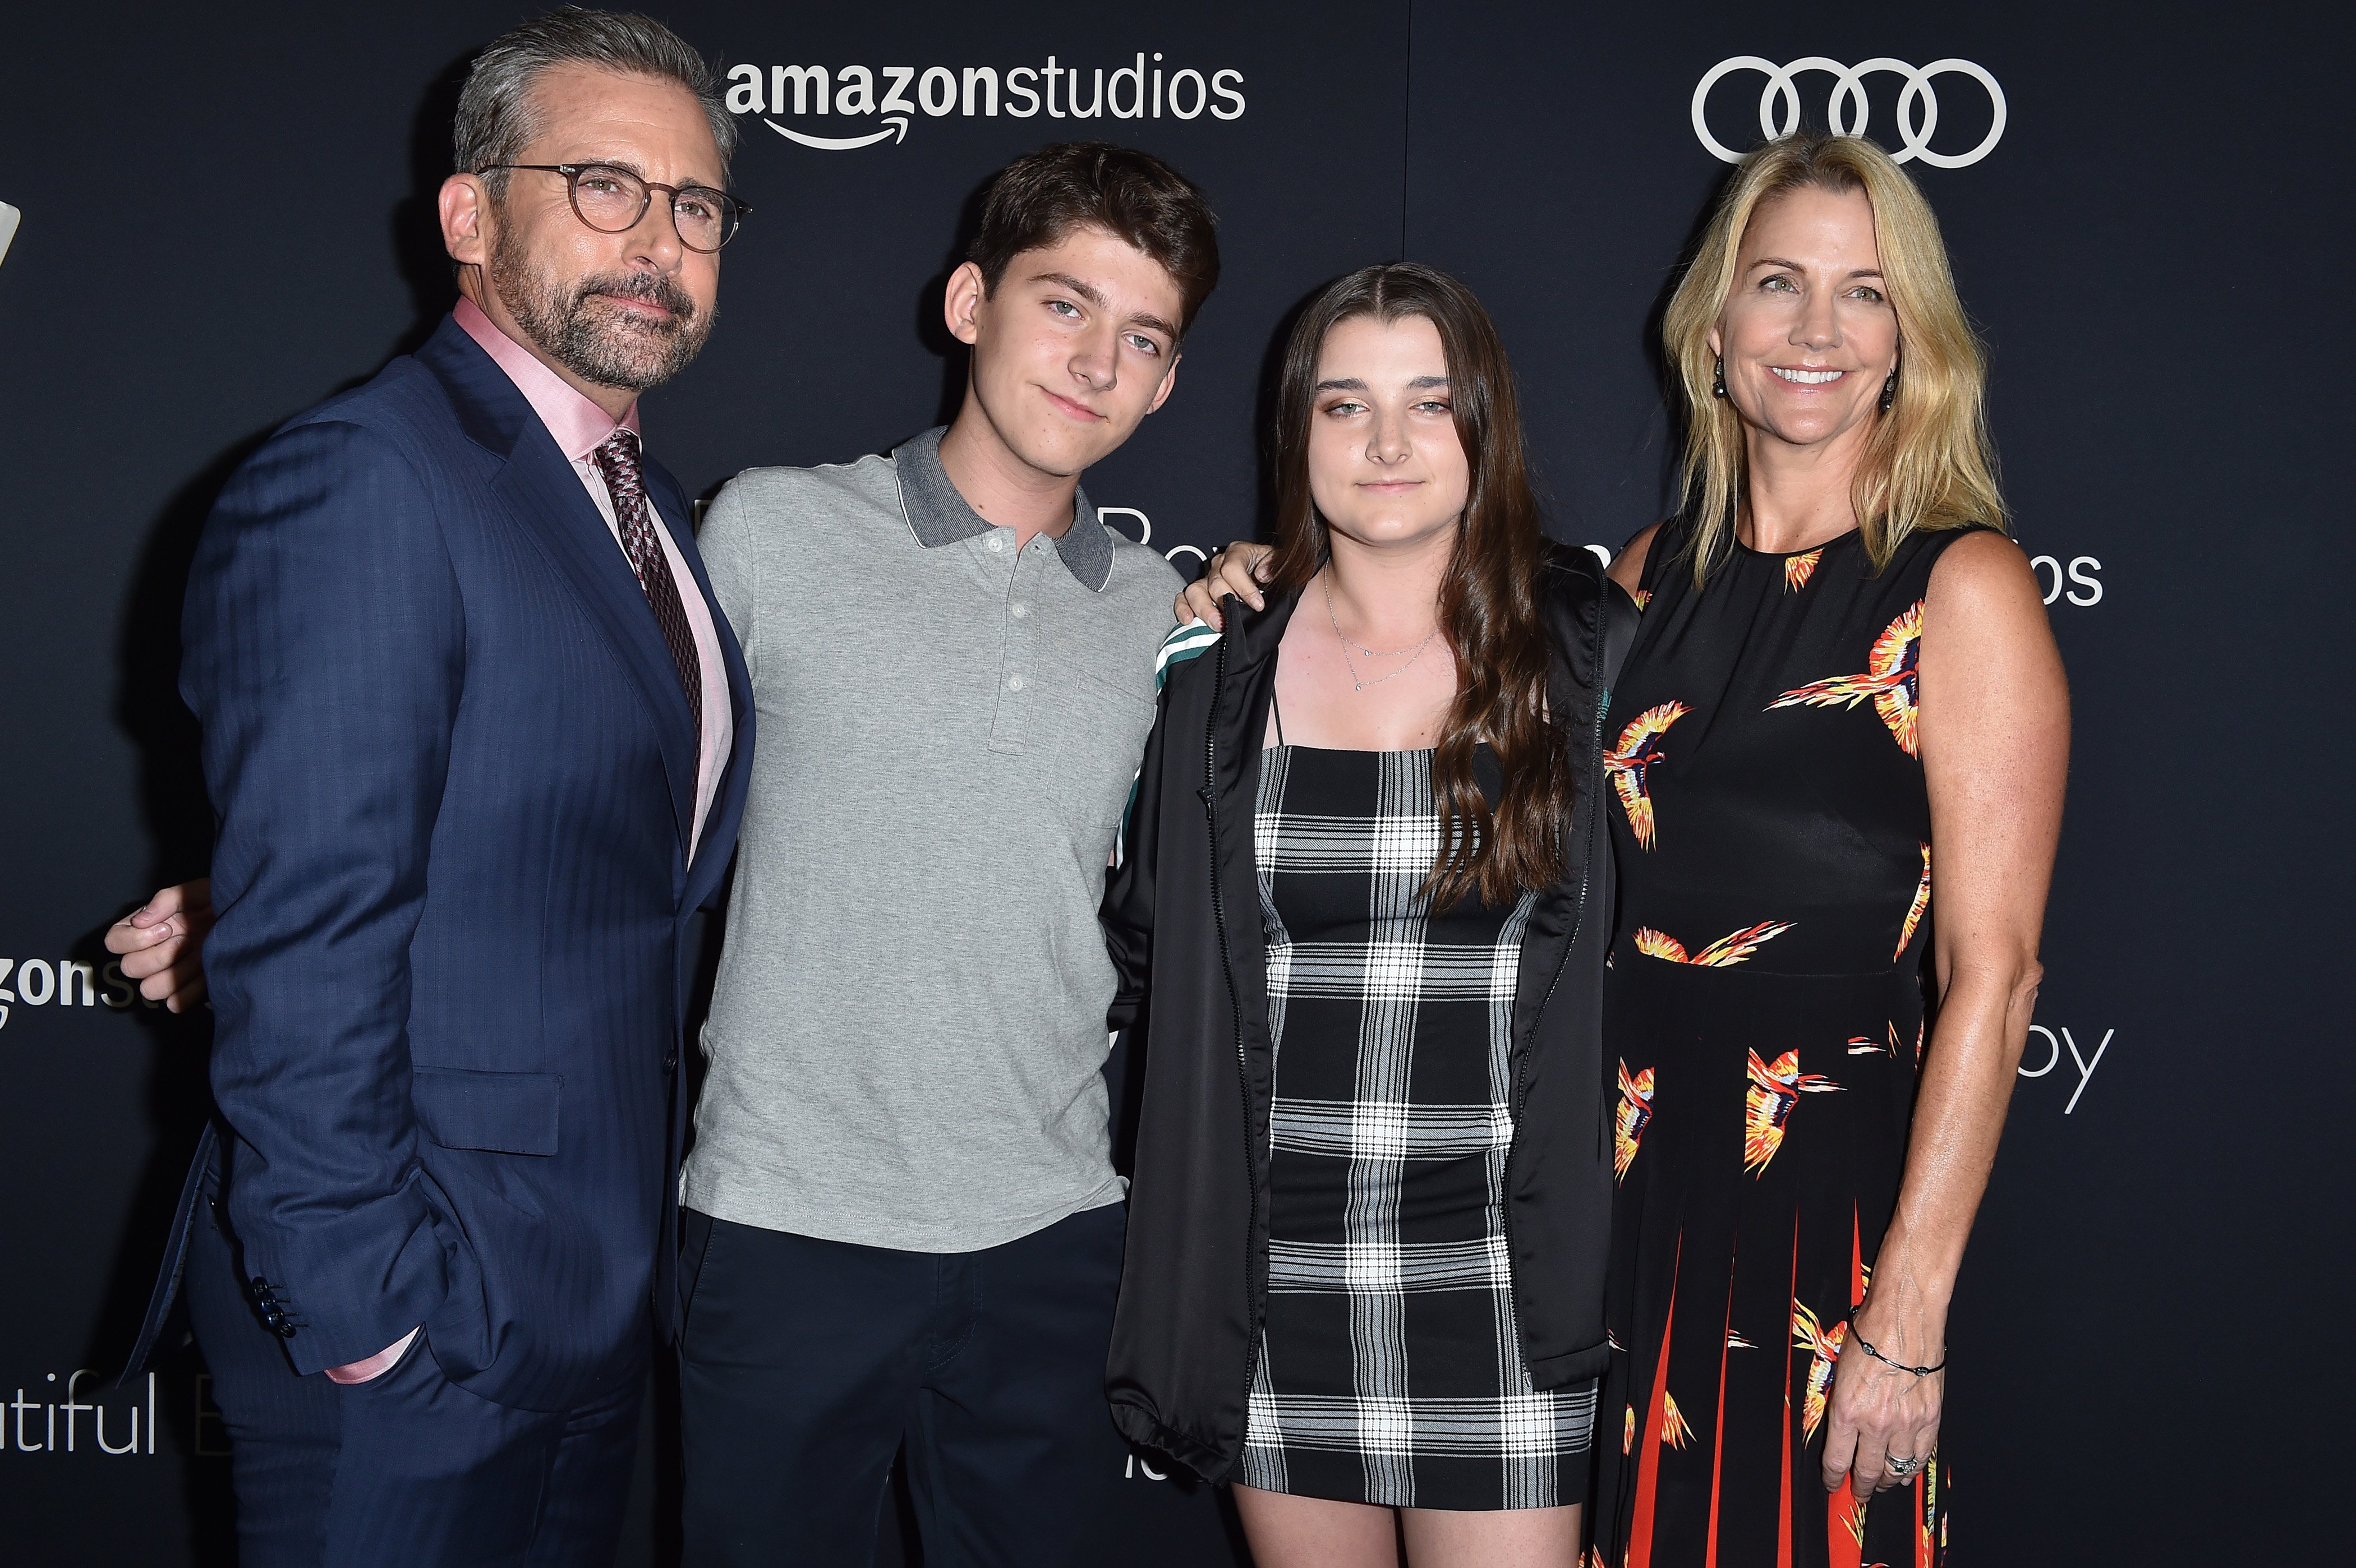 Steve Carell, John Carell, Elisabeth Anne Carell and Nancy Carell at the Amazon Studios of Angeles premiere of "Beautiful Boy" on October 8, 2018 in Beverly Hills | Source: Getty Images